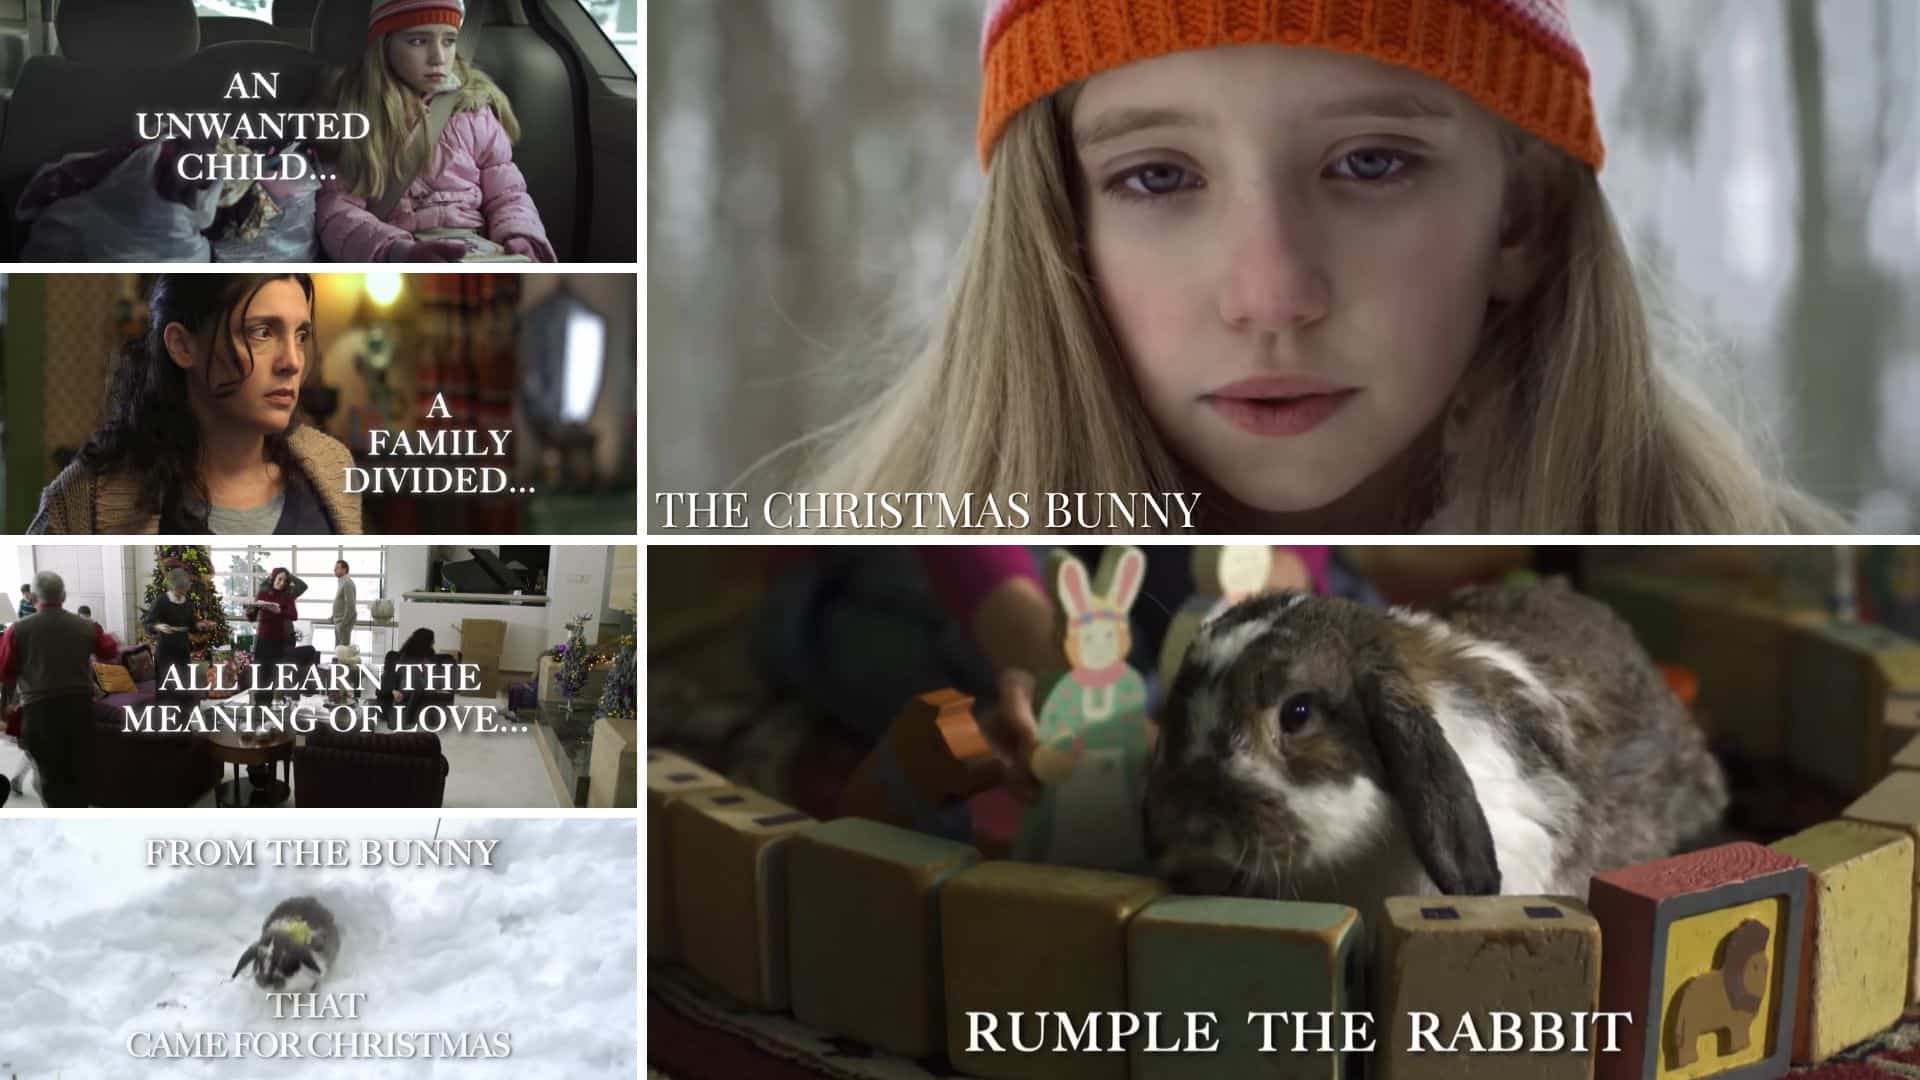 The Christmas Bunny, Movies About Rabbits